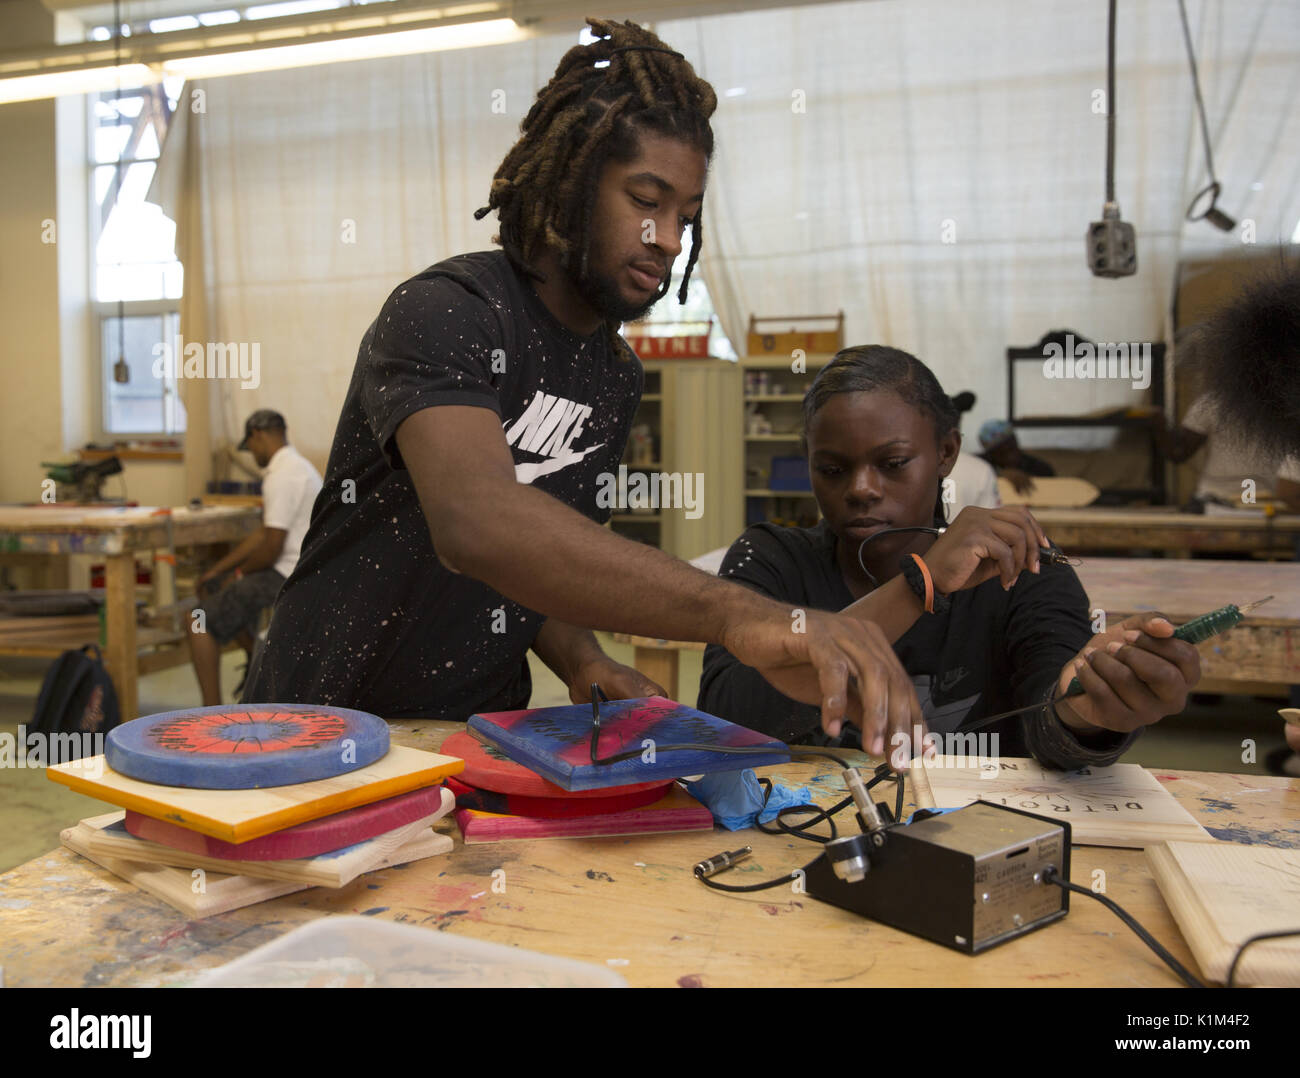 Students from the Detroit Community School participate in a motivational summer paid work program where they learn life, work and business skills in an entrepreneurial incubator type environment. Woodworking & sign shop. Stock Photo